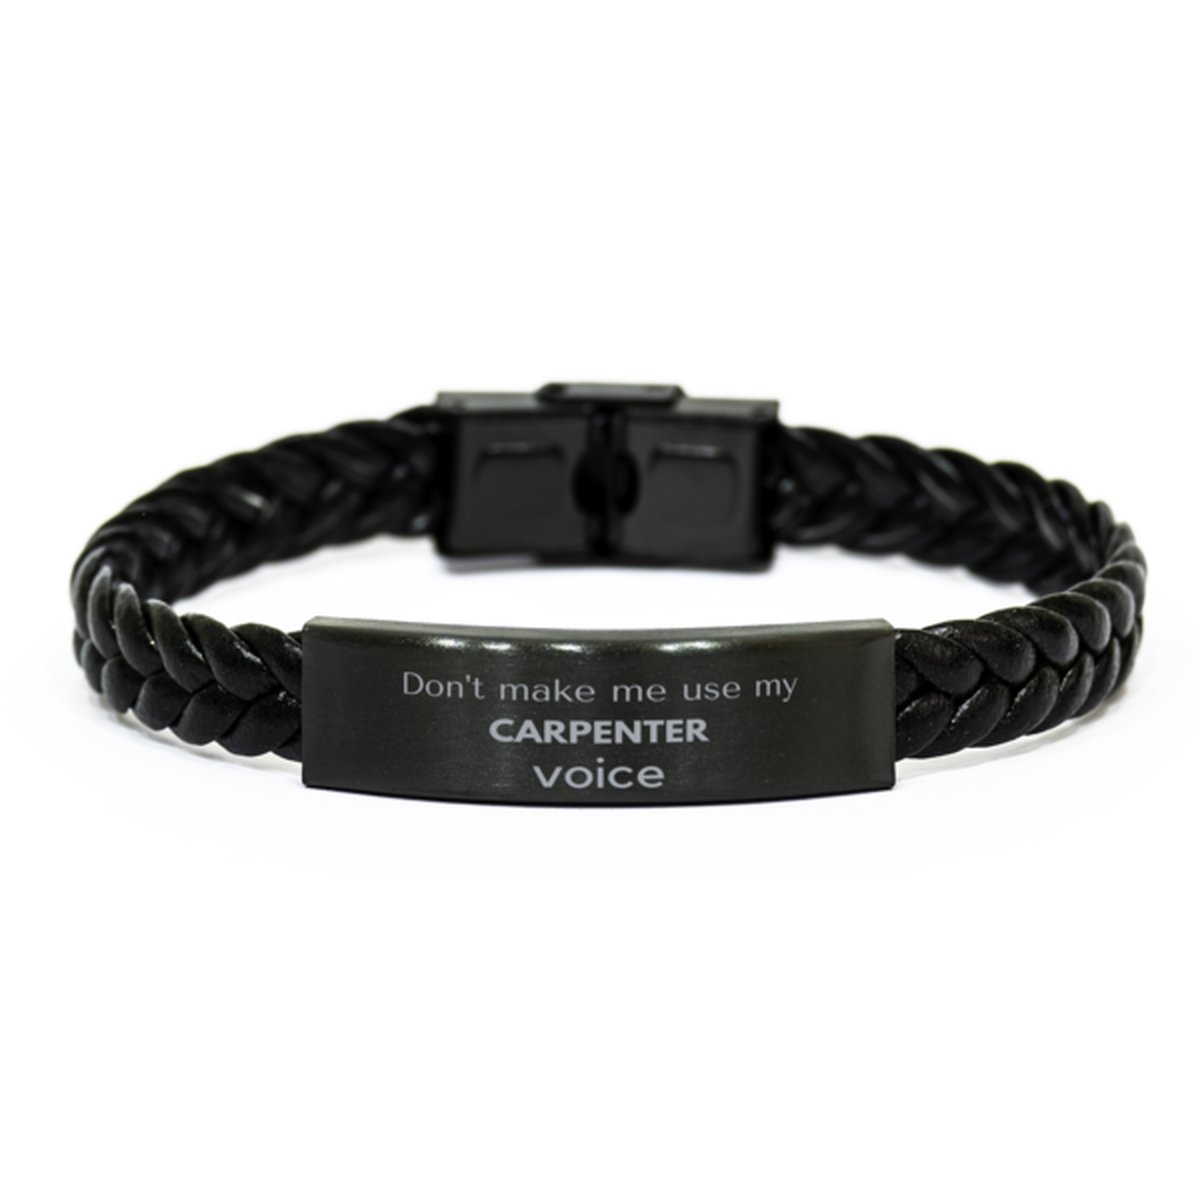 Don't make me use my Carpenter voice, Sarcasm Carpenter Gifts, Christmas Carpenter Braided Leather Bracelet Birthday Unique Gifts For Carpenter Coworkers, Men, Women, Colleague, Friends